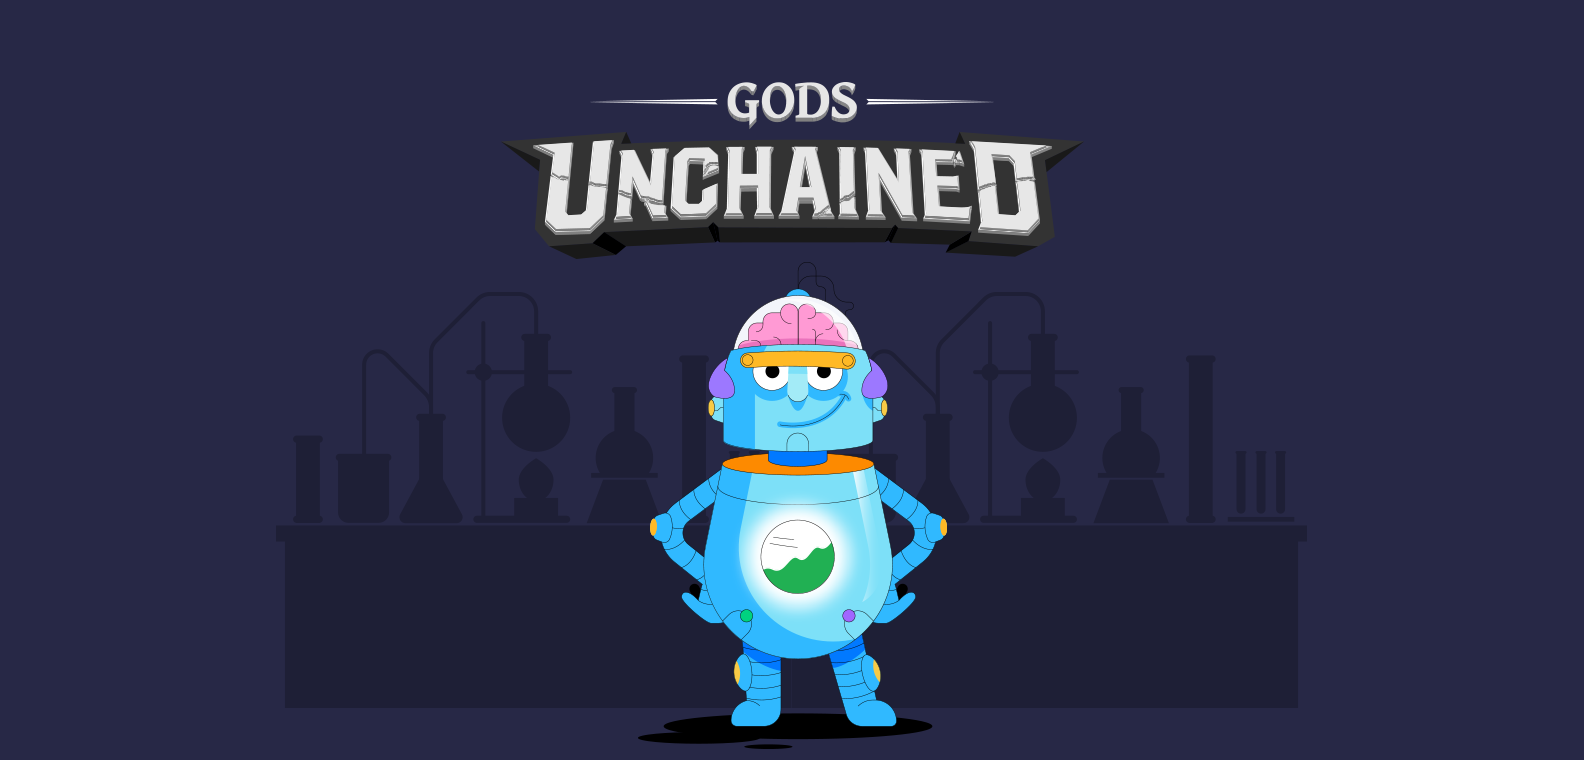 Gods Unchained Review:  Is $GODS Worth It?